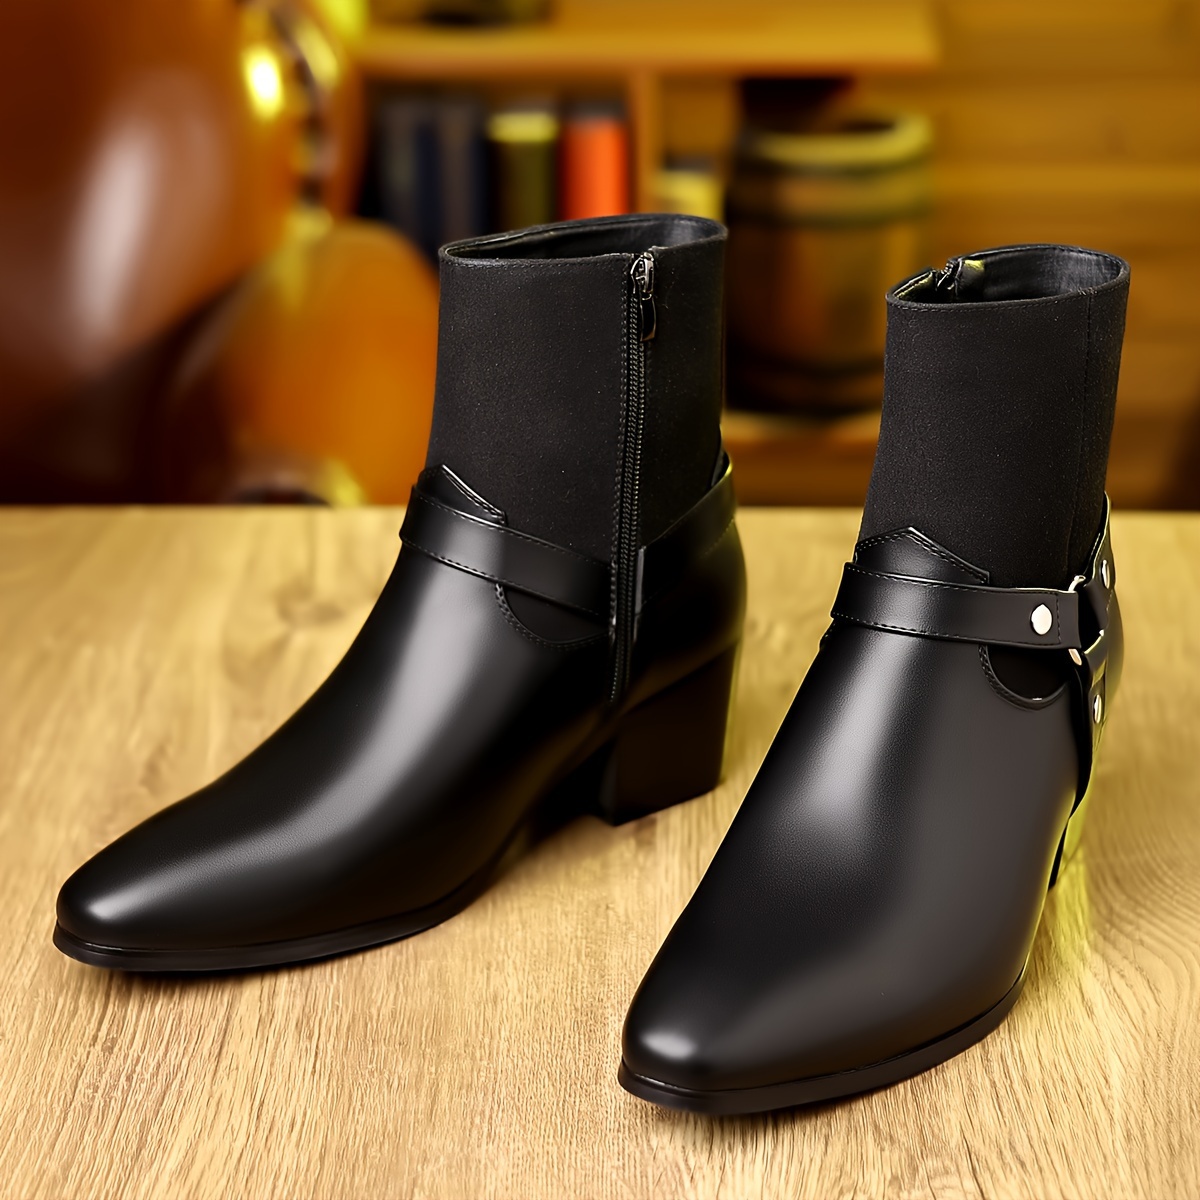 mens heeled boots with zippers casual walking shoes pu leather boots details 6